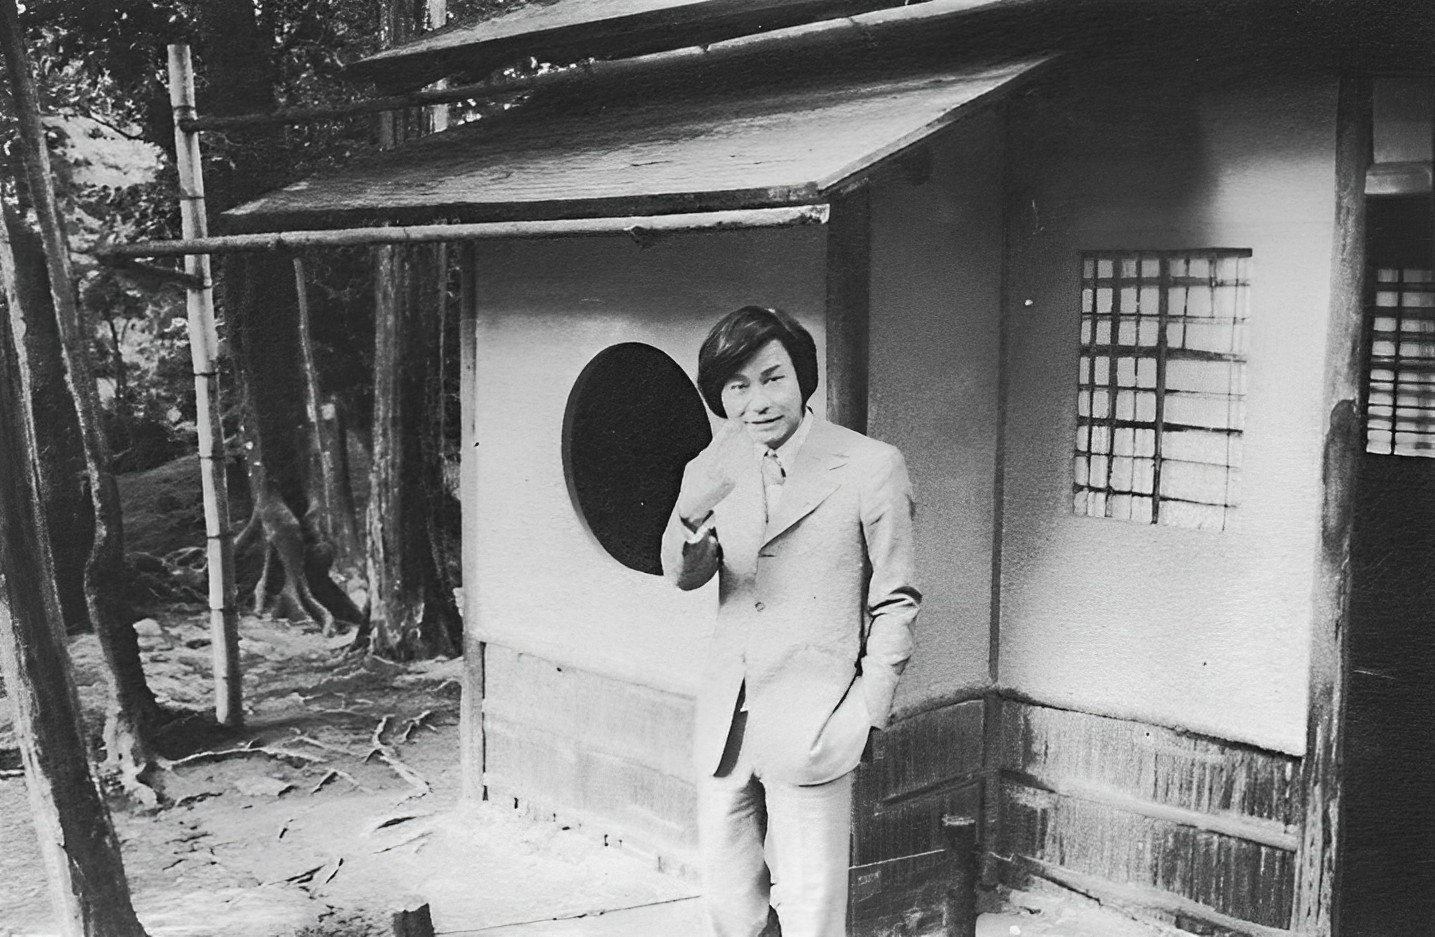 (1) These photos show Kurokawa outside his Nakagin Capsule Building and at the moss garden in Kyoto. The round hole motif is common to both his buildings and traditional architecture, a point he indicates here half jokingly: ‘Who me? ... I copied this?’